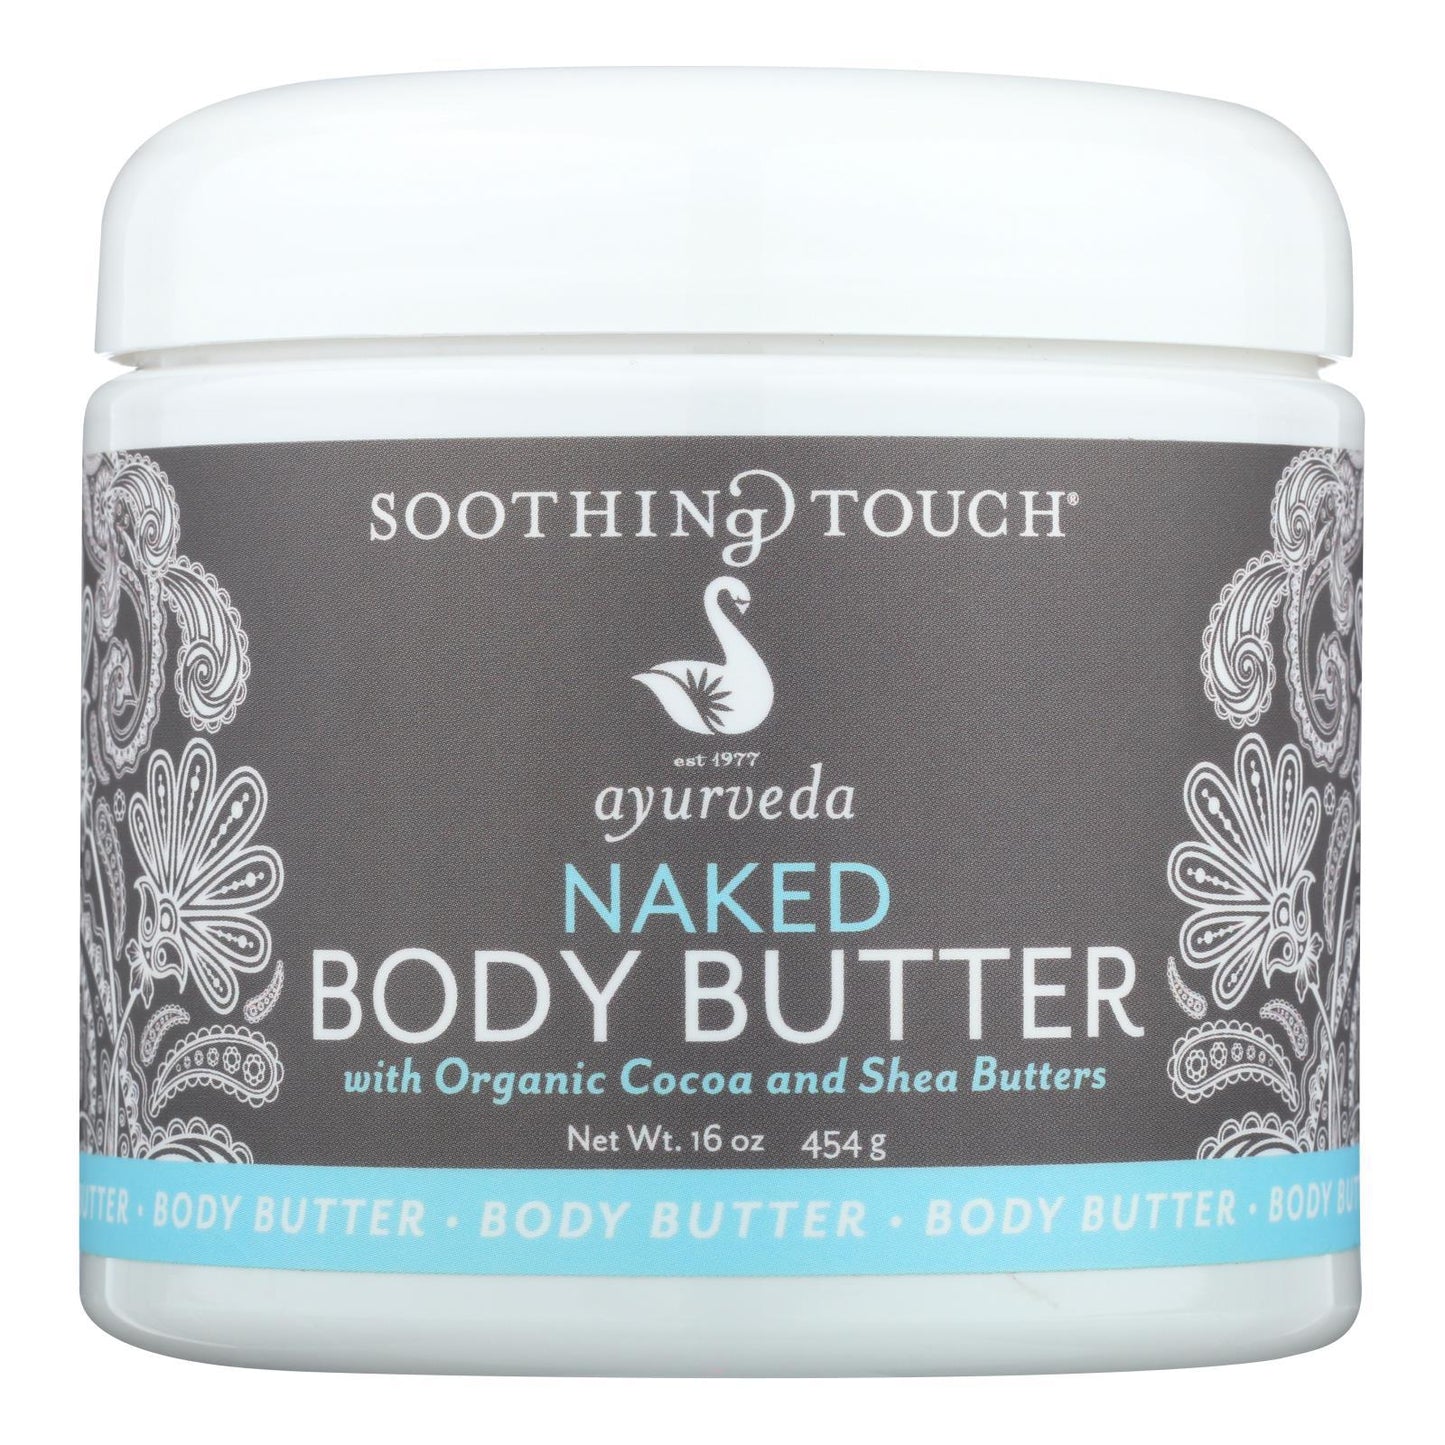 Soothing Touch - Body Butter Naked - 1 Each-13 Oz